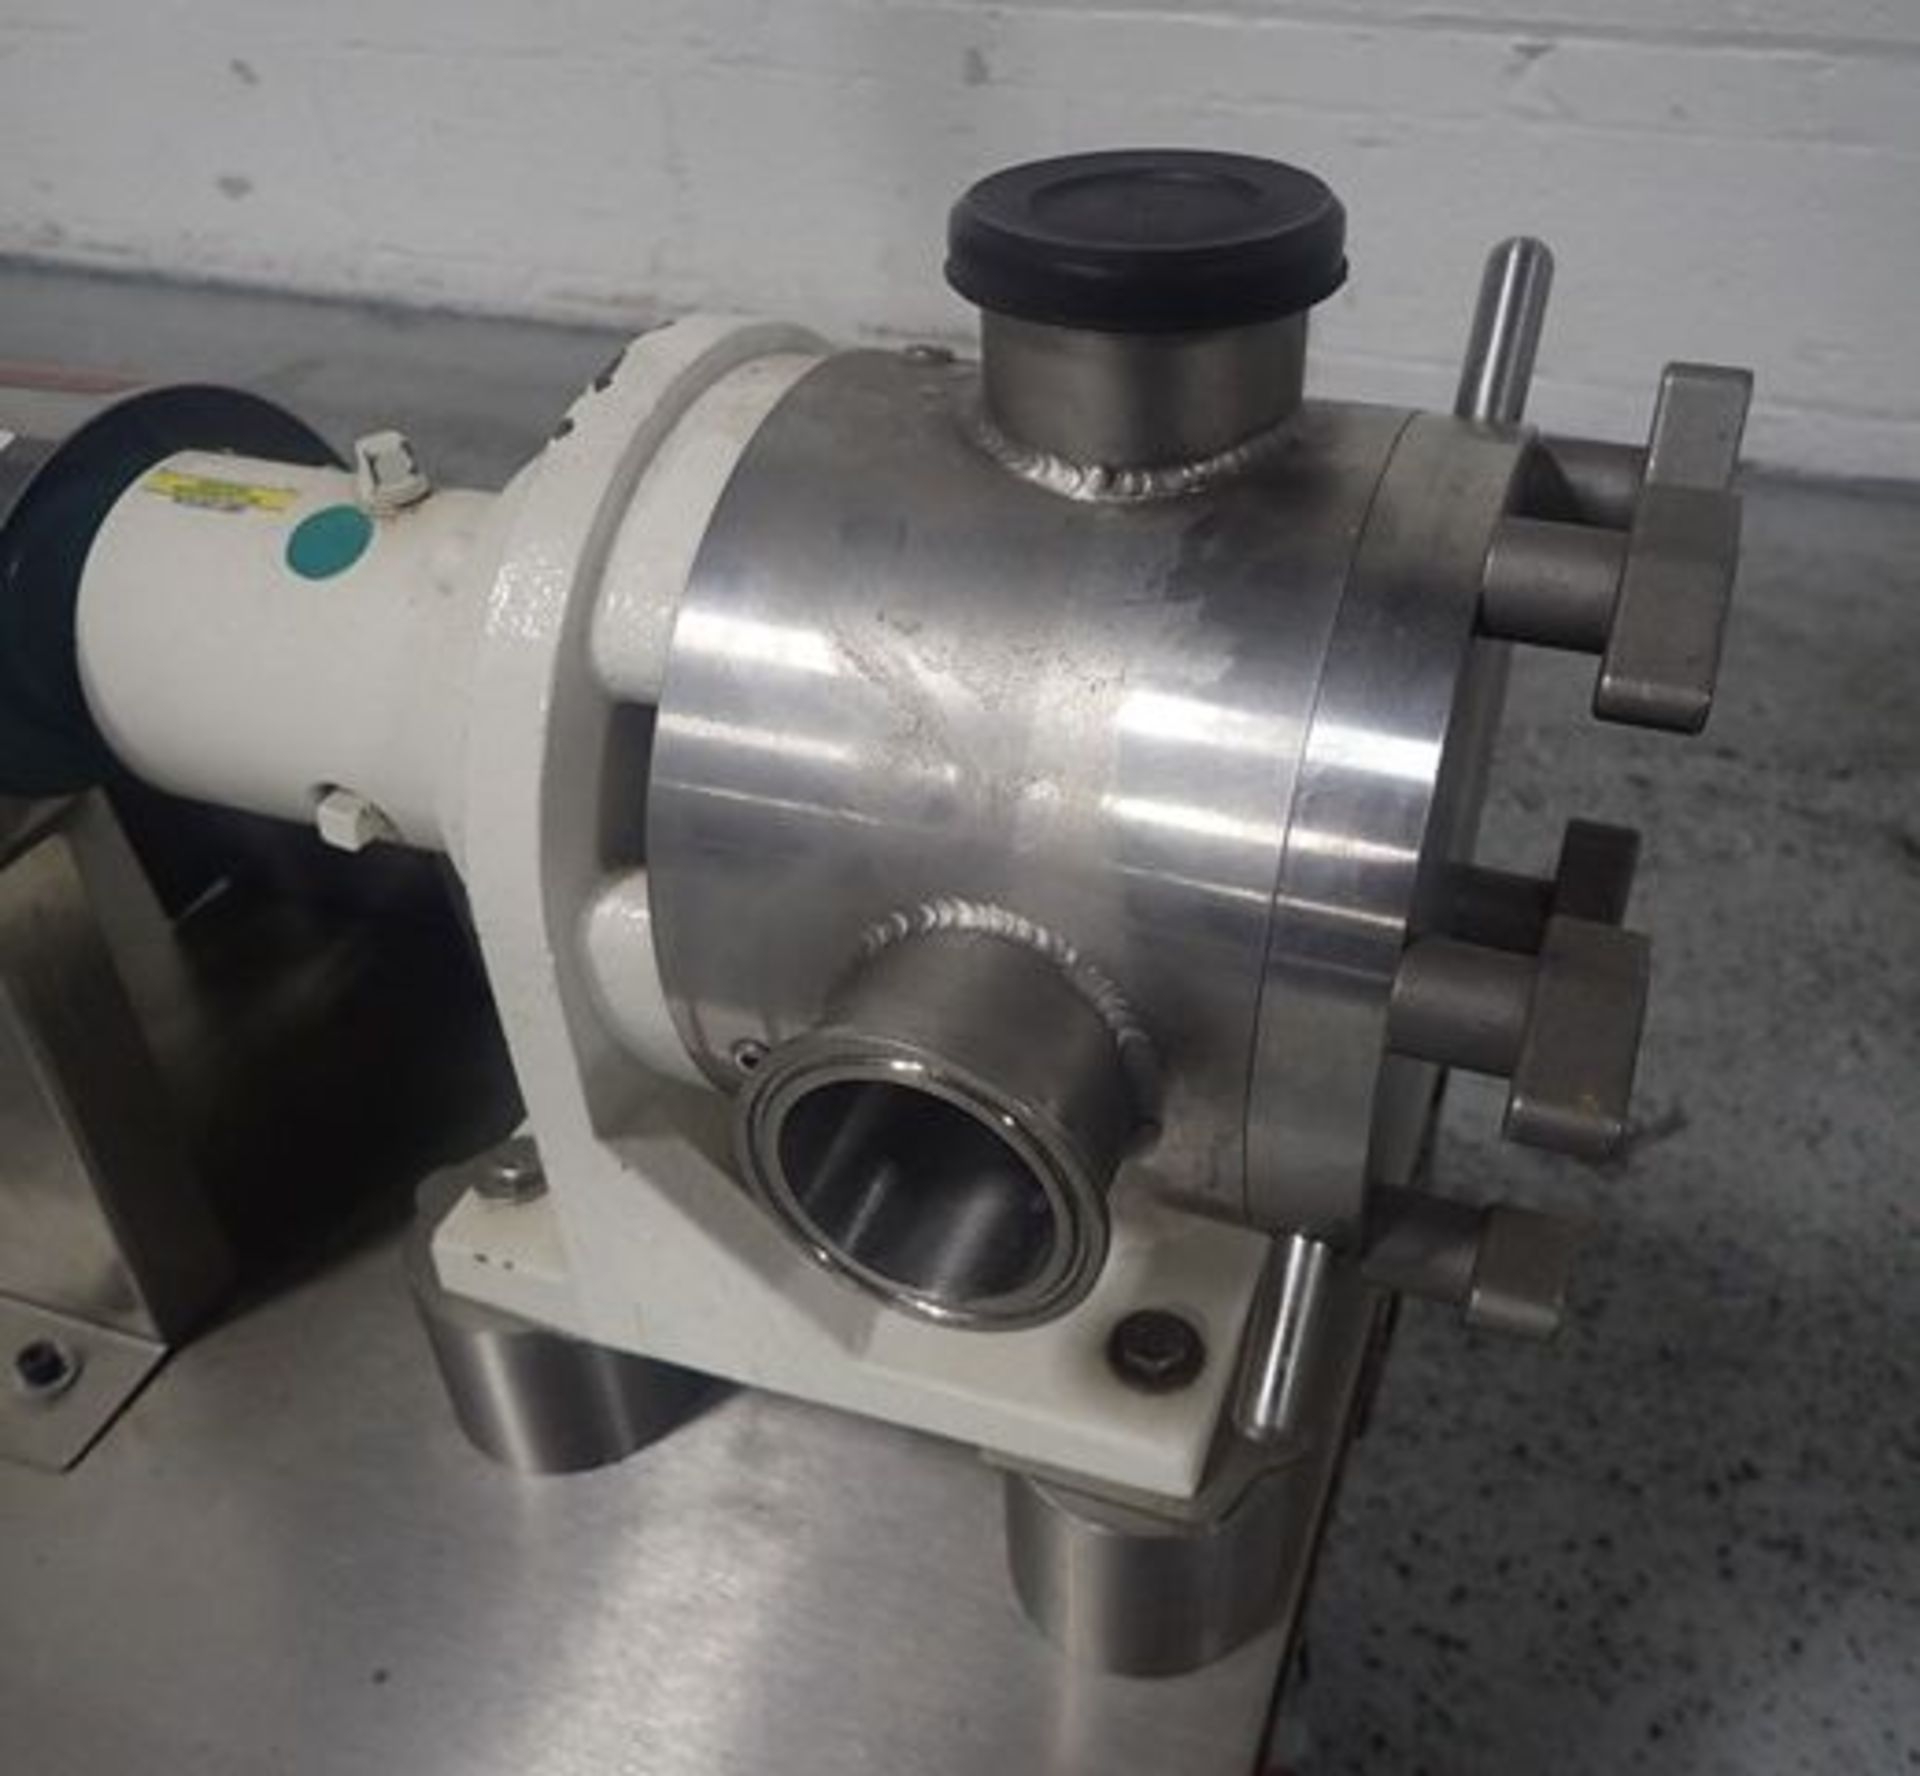 Watson-Marlow Sine pump, model MR120HNTC, stainless steel construction, 2" inlet and outlet - Image 7 of 9